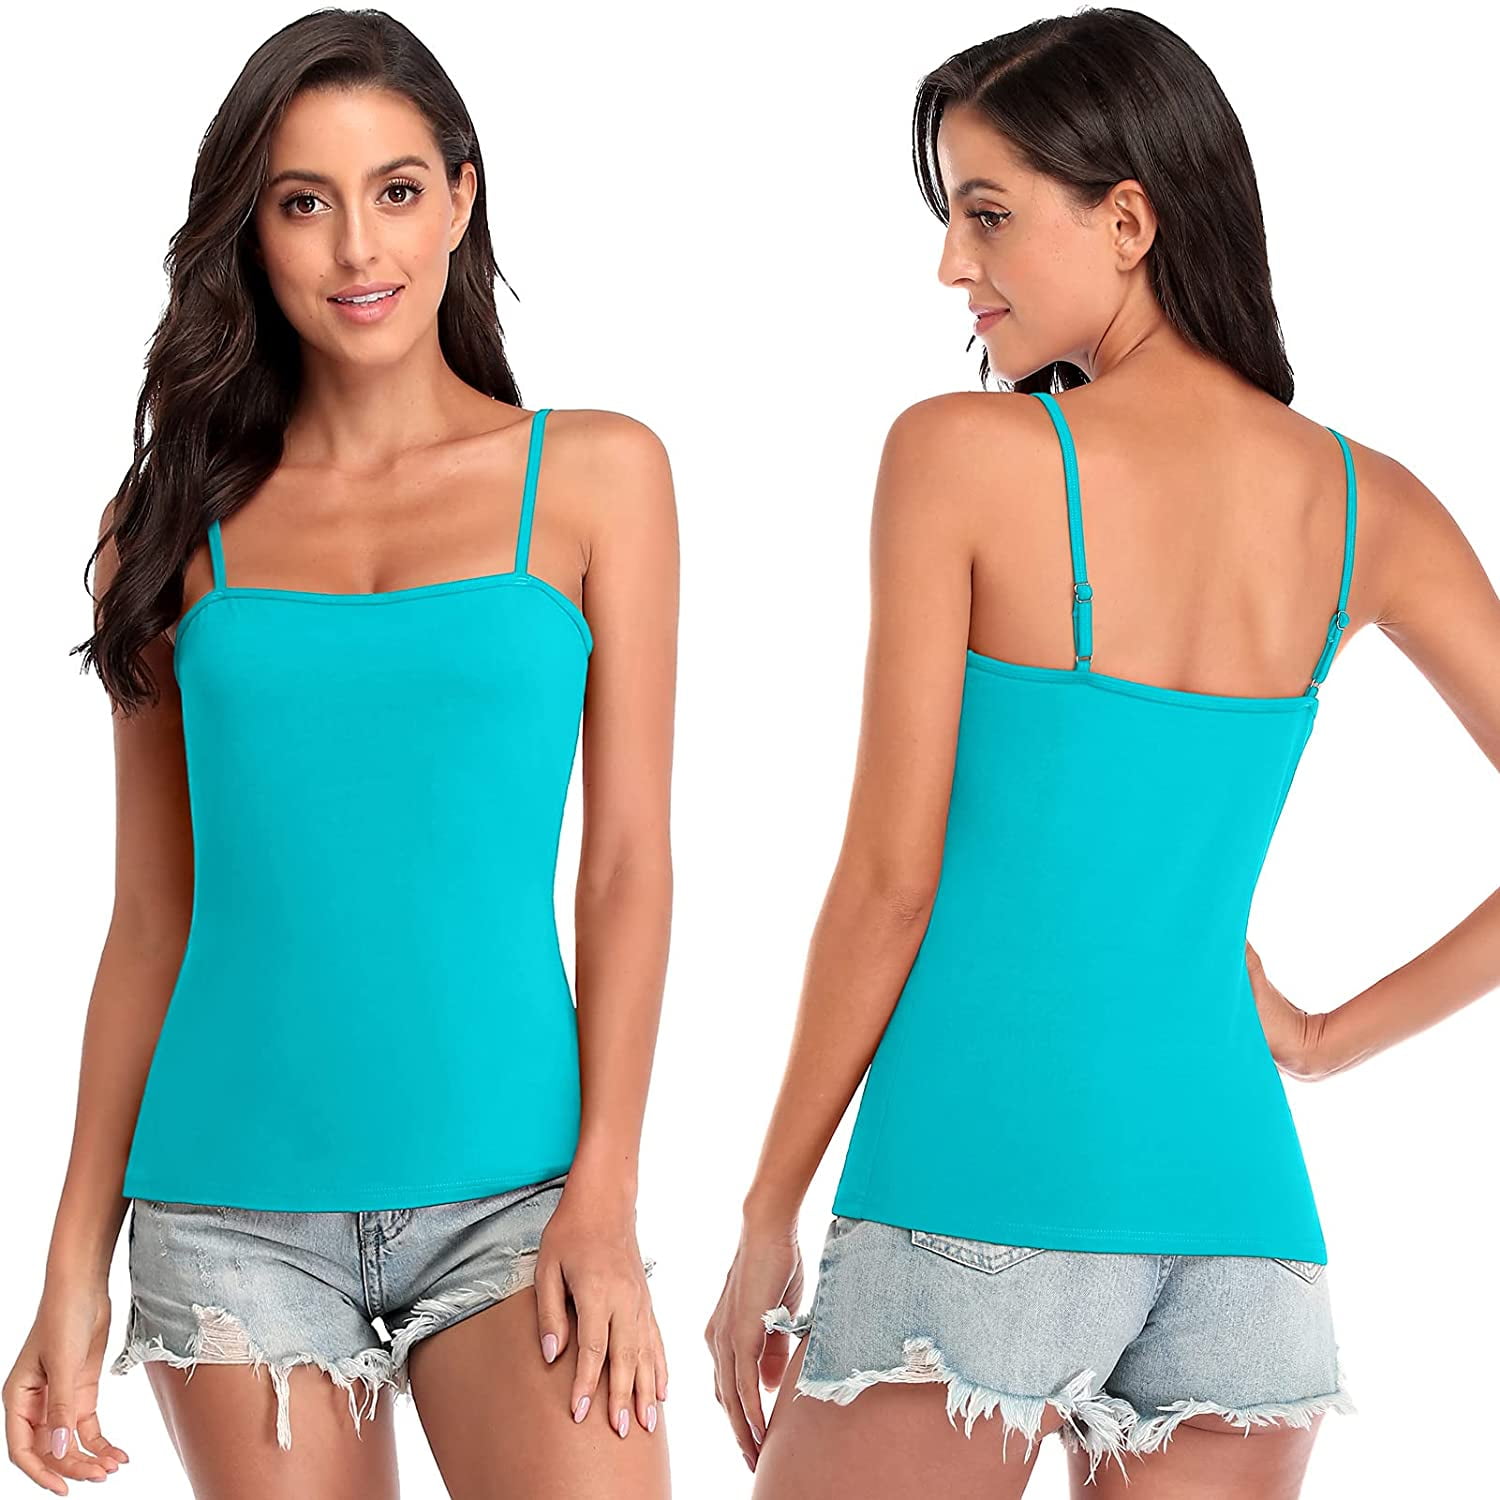 Adjustable Cotton Shapewear Camisole Plus Size Tops With Spaghetti Straps  For Womens Casual Wear From Sandlucy, $15.63